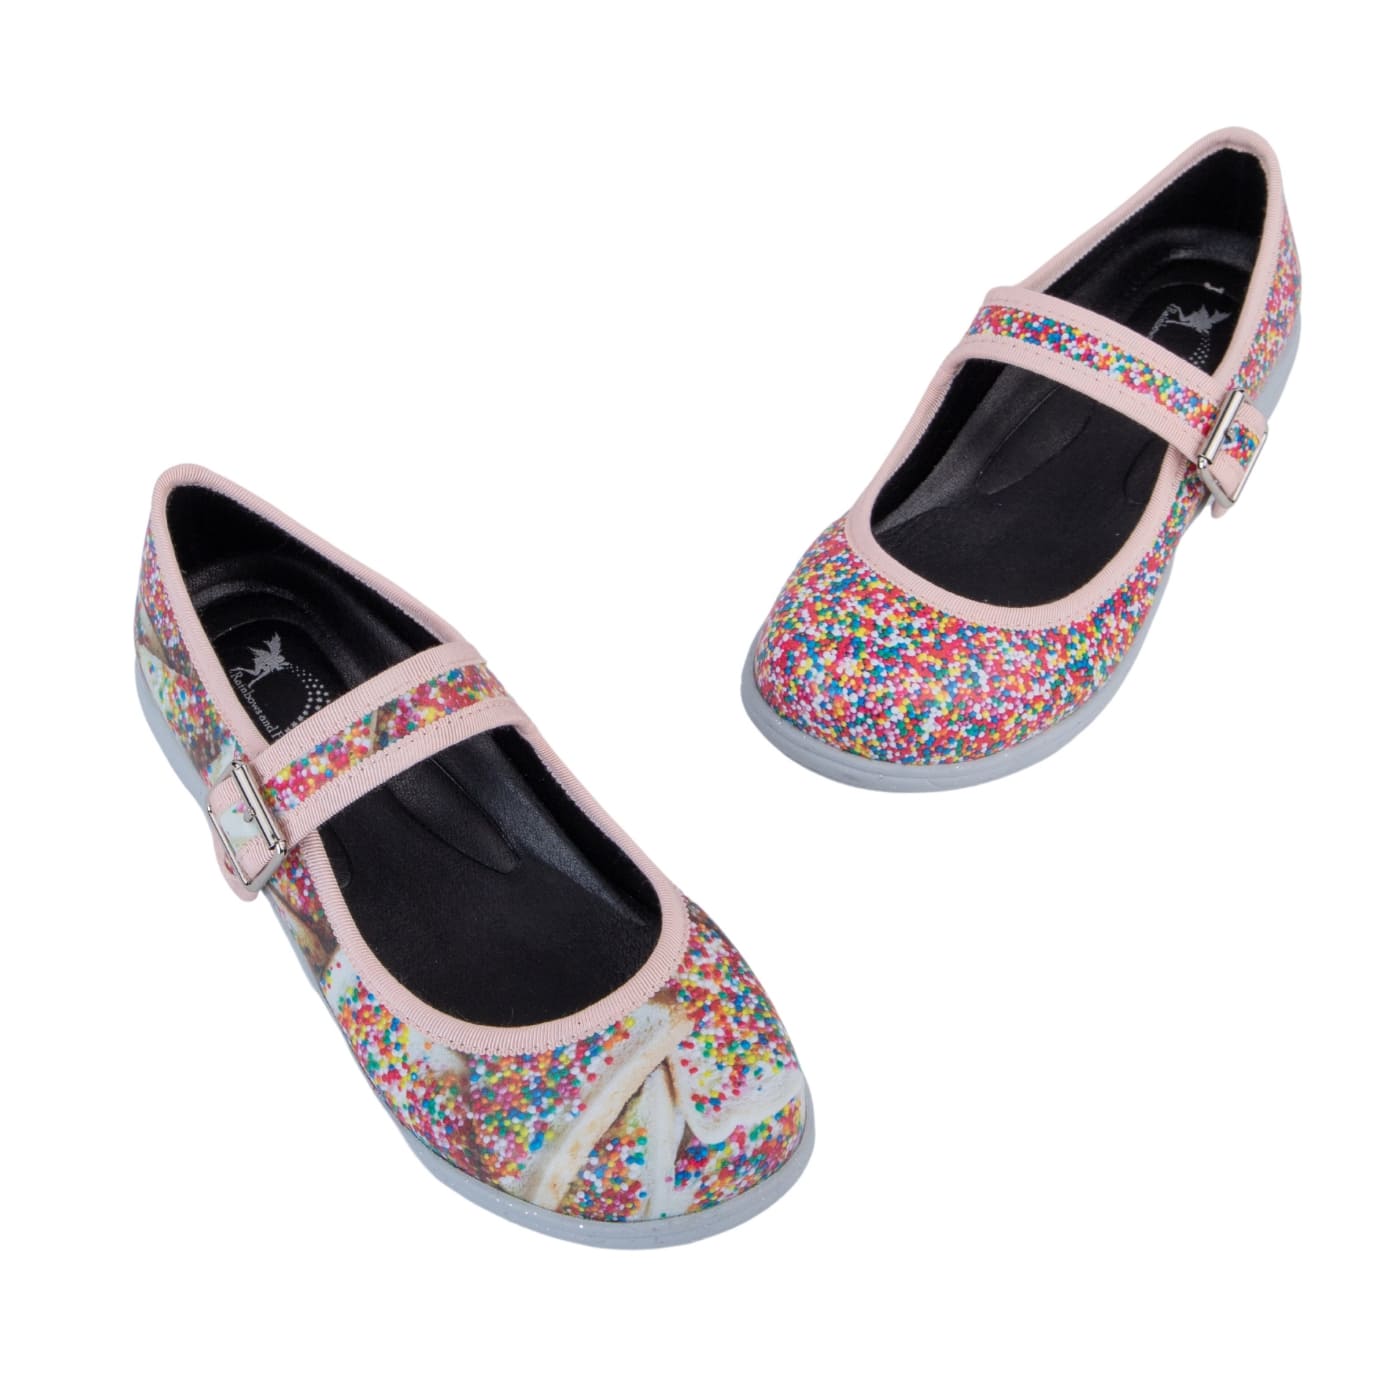 Sprinkles Mary Janes by RainbowsAndFairies.com.au (Fairy Bread - 100s & 1000s - Mismatched Shoes - Glitter Soles - Glitter - Quirky) - SKU: FW_MARYJ_SPRNK_ORG - Pic-01